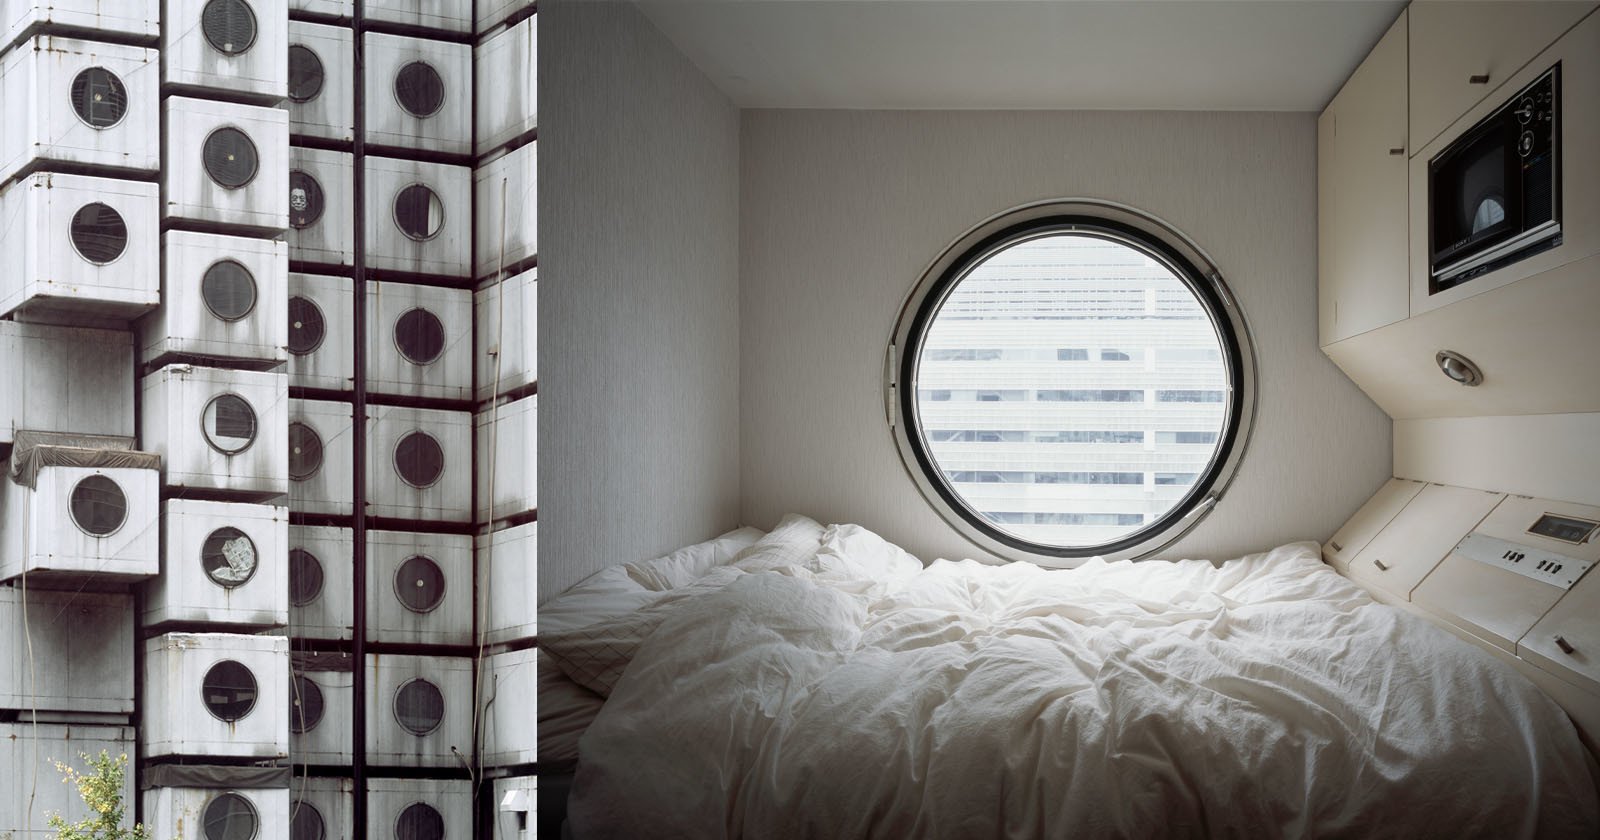  photographer decade long series iconic capsule tower 